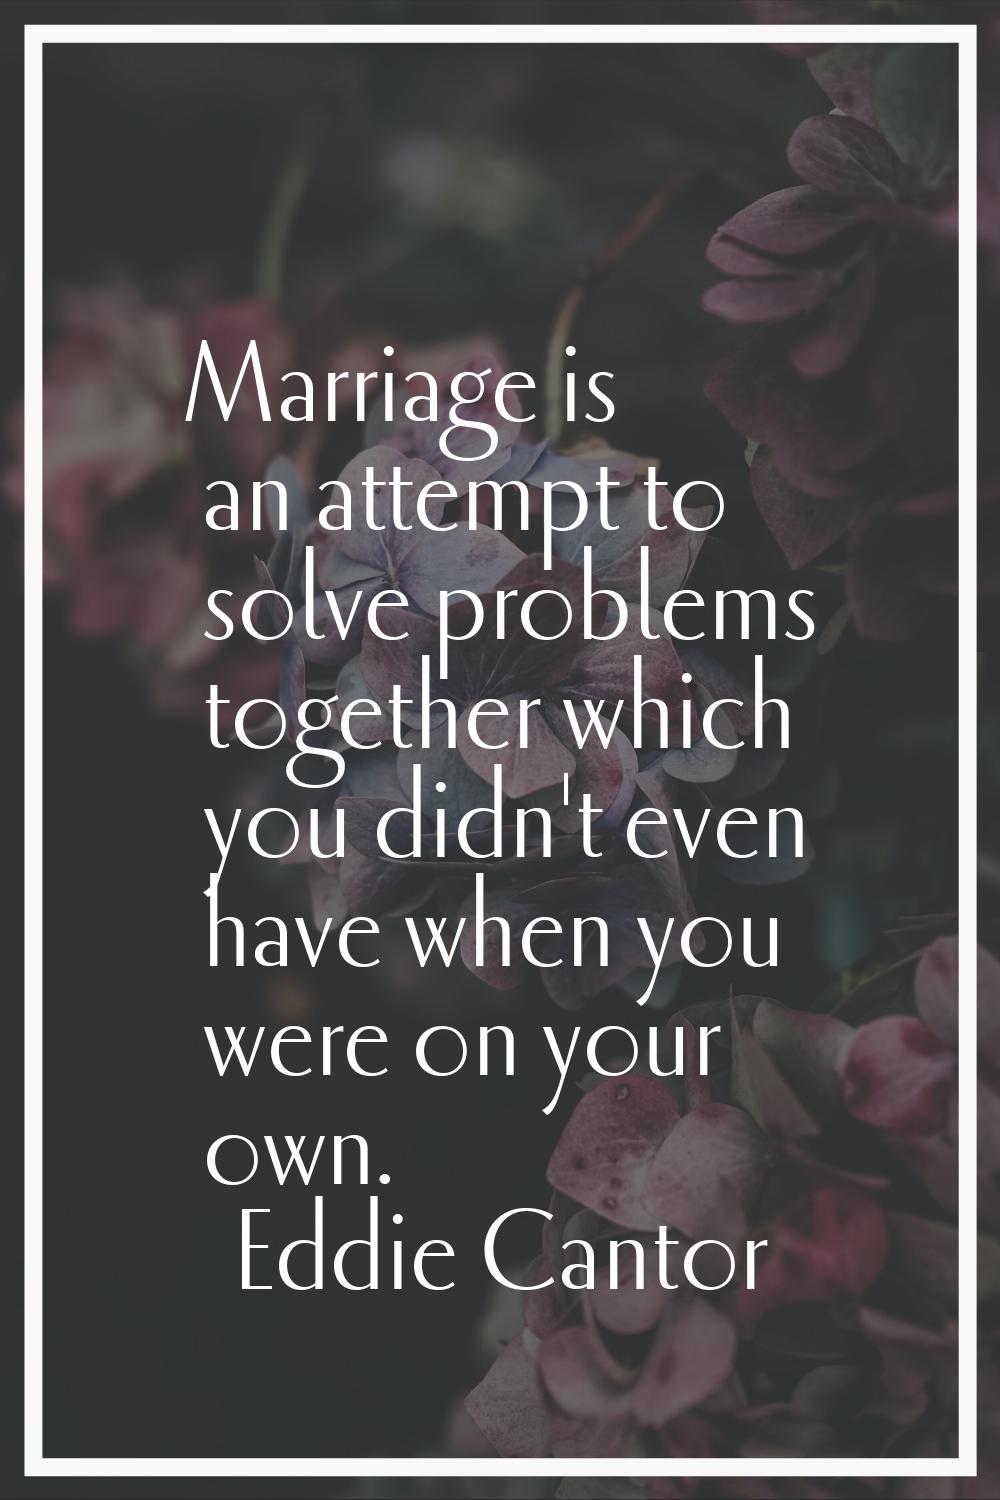 Marriage is an attempt to solve problems together which you didn't even have when you were on your 